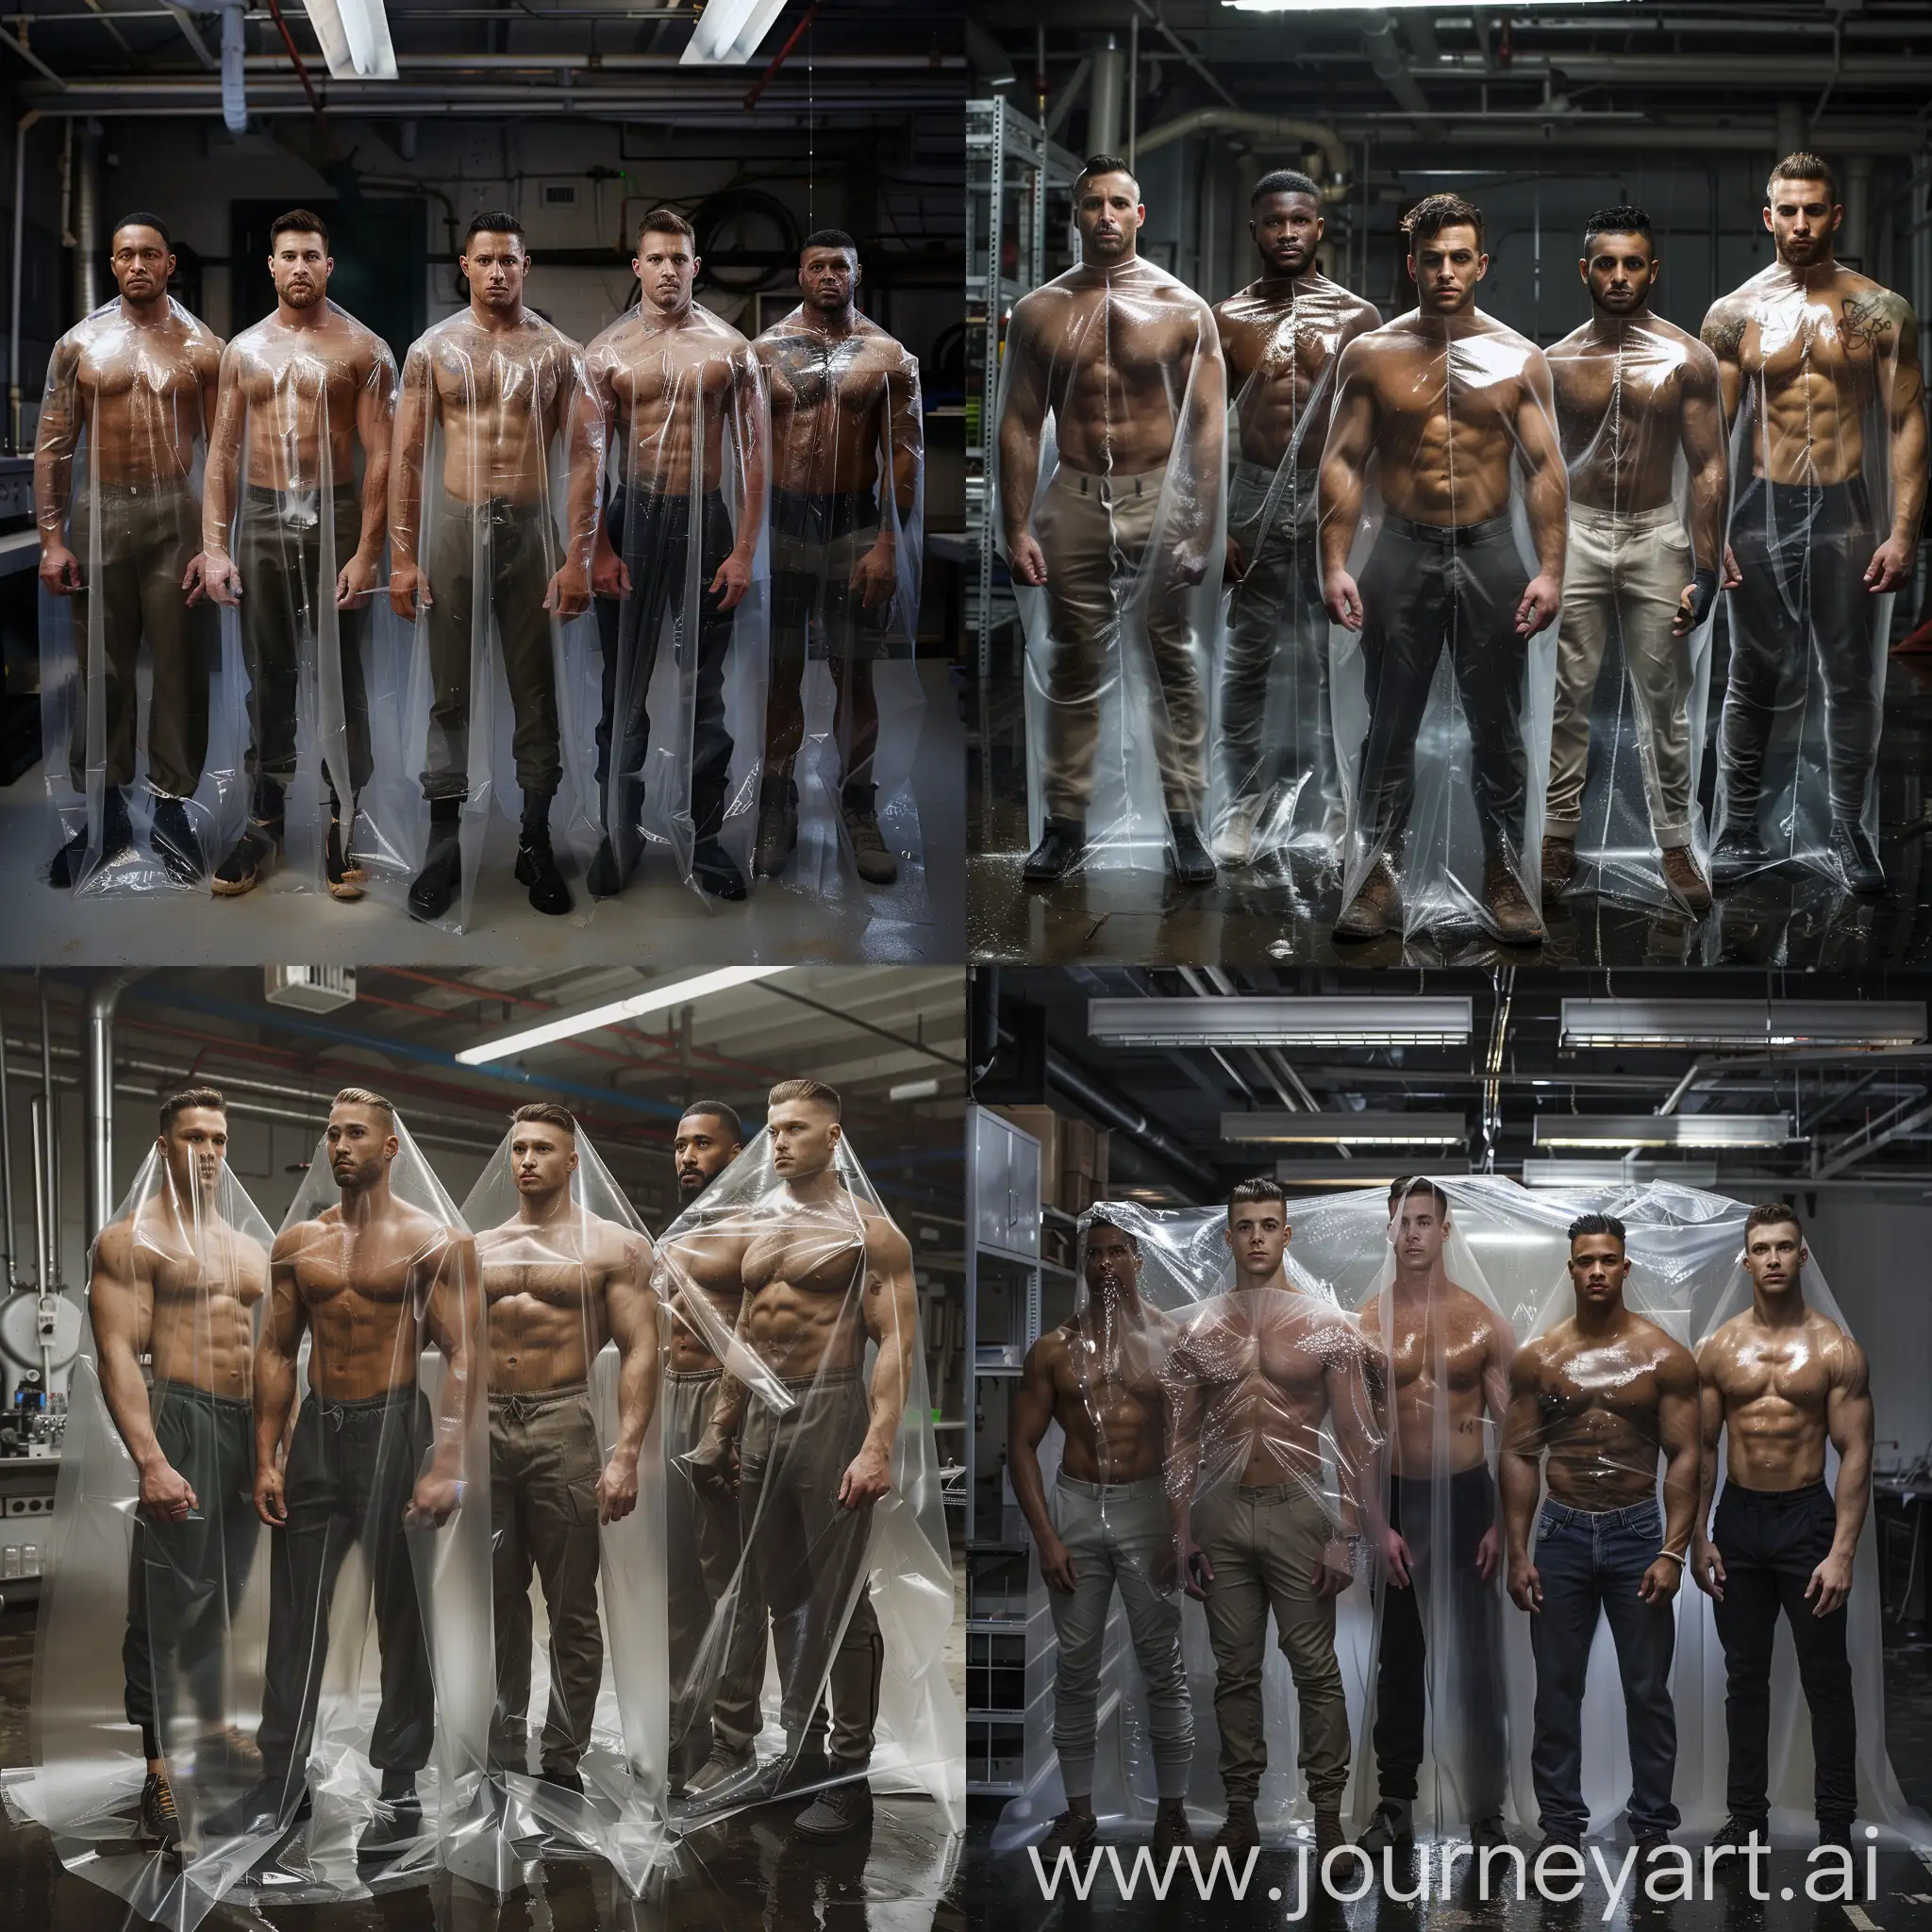 Five good looking fit men standing in lines, handsome fit men standing with plastic film covering them, plastic transparent on top of each one, transparent plastic covering them, men wearing different types of pants, each man with a different body type, some more taller and Others more fit and muscular, different ethnicities skin colors, basement laboratory background, cinematic lighting